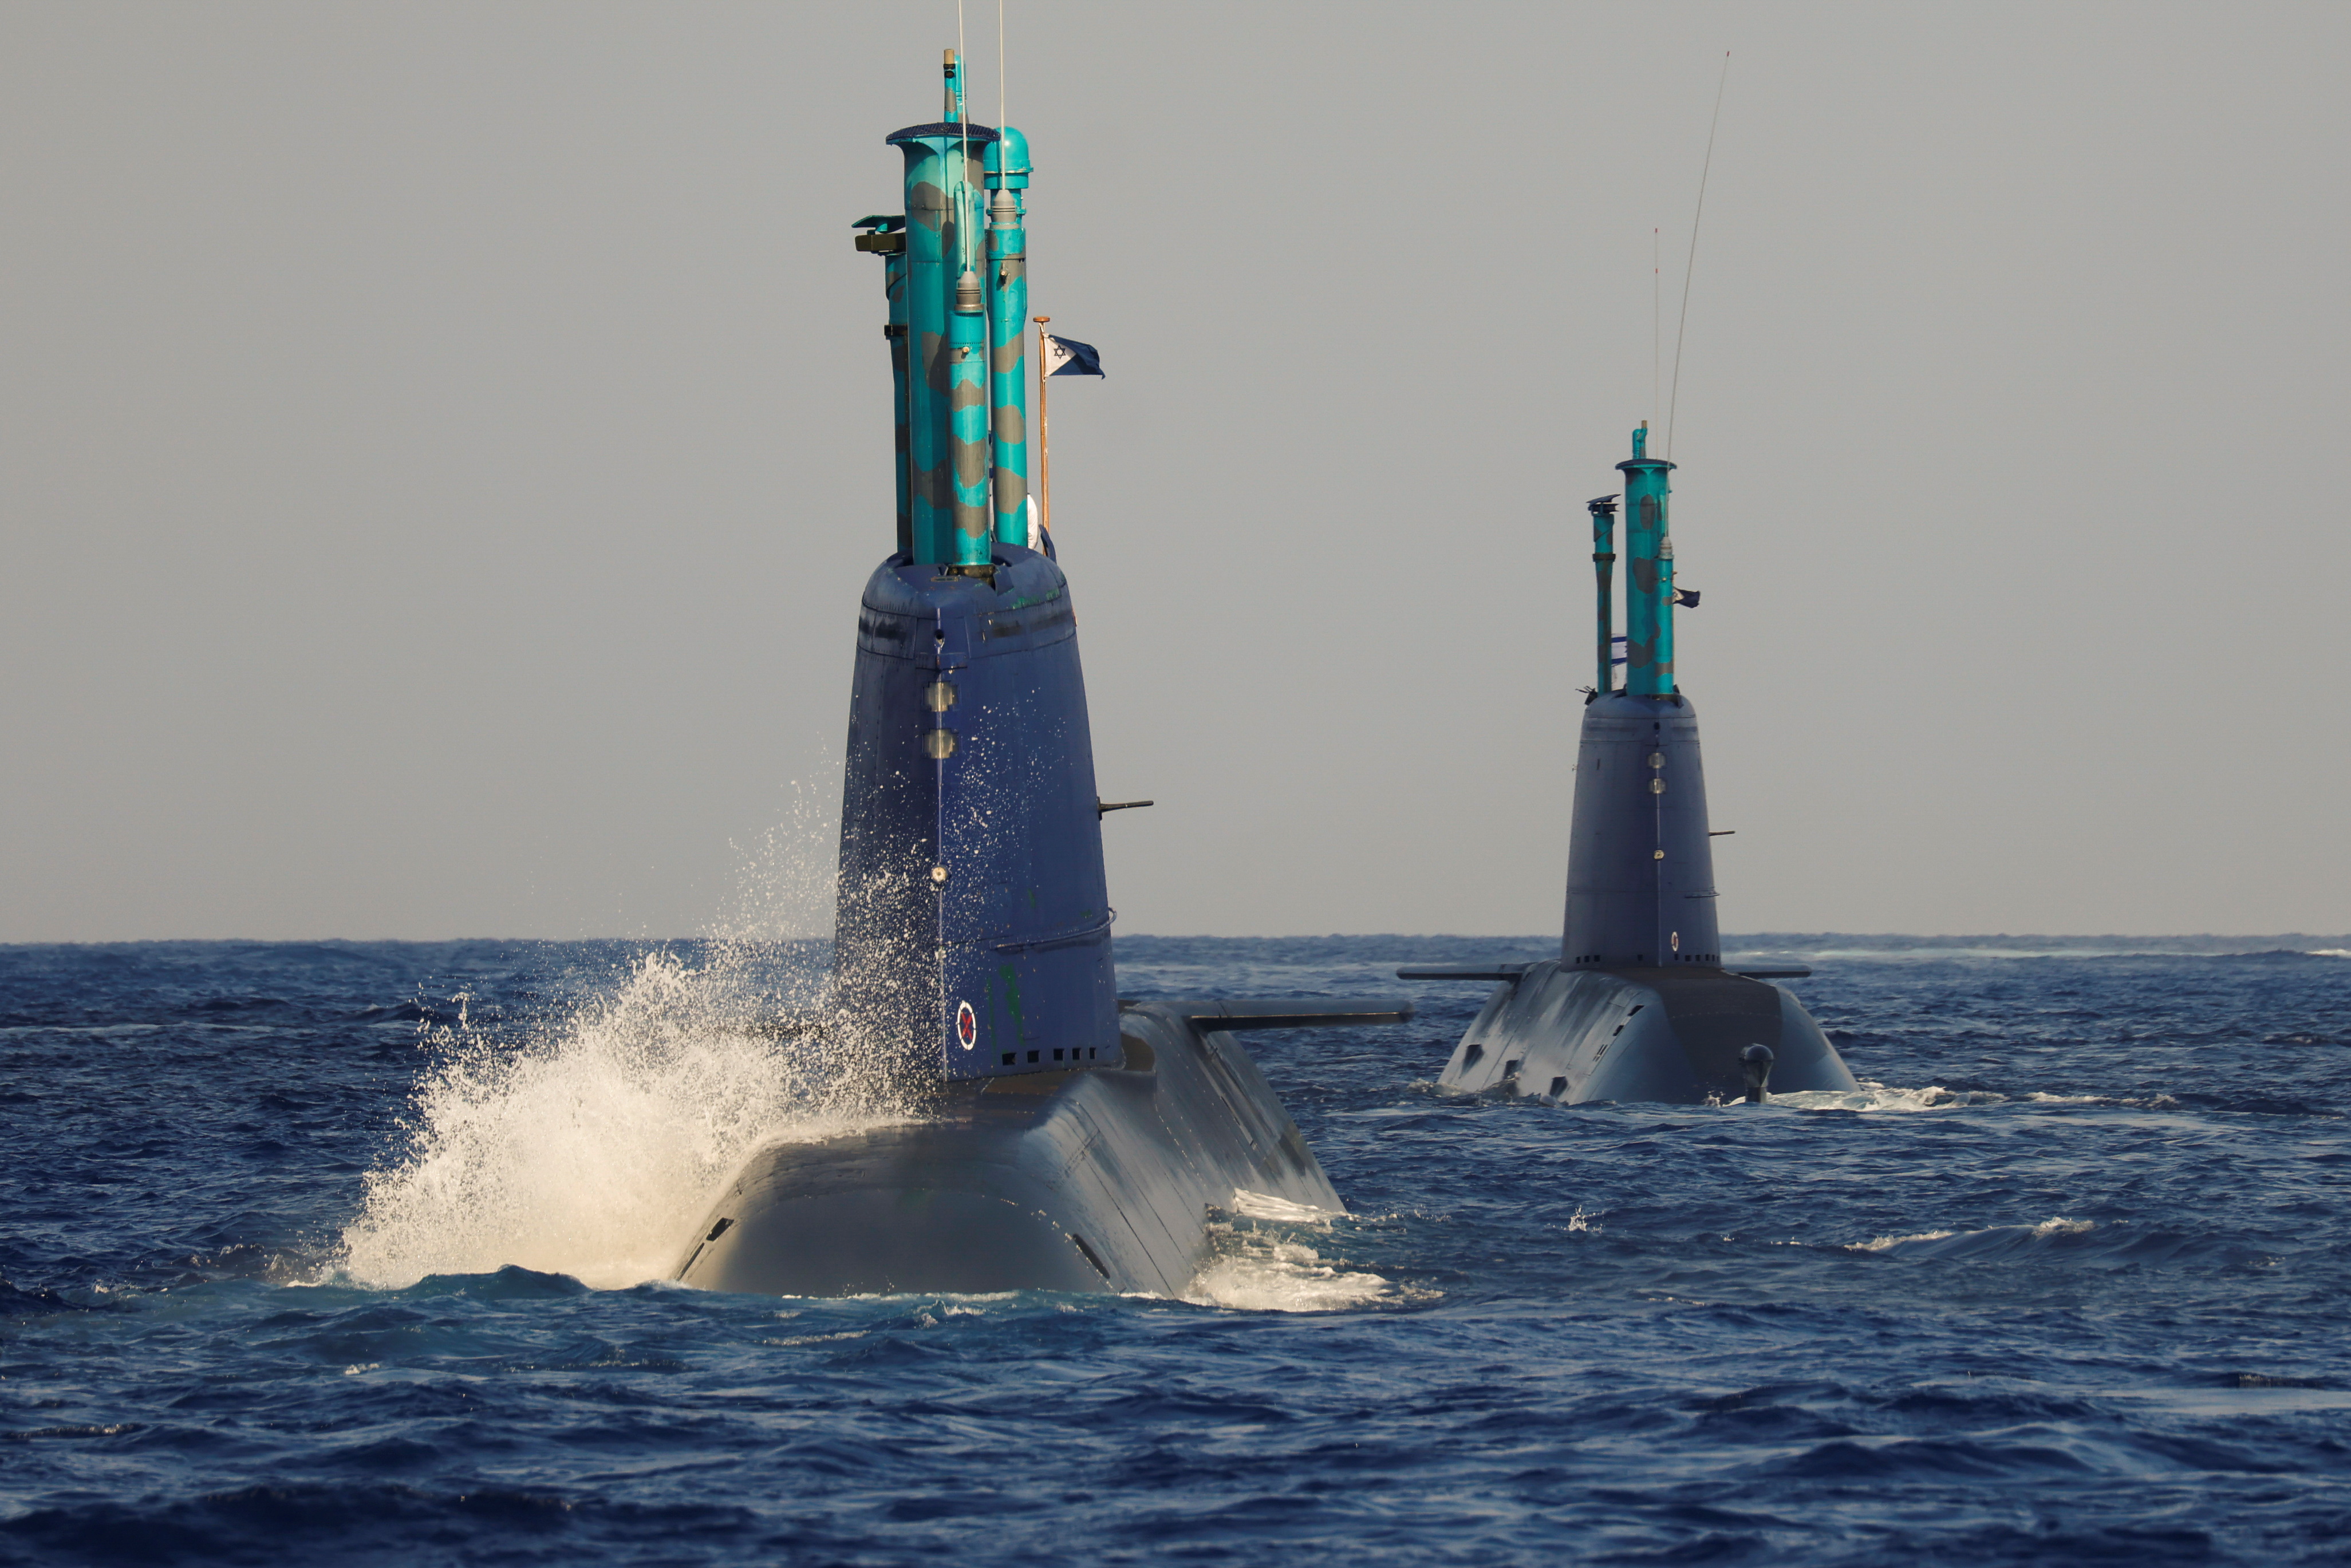 Leviathan and a second Israeli navy submarine are seen during a naval manoeuvre in the Mediterranean Sea off the coast of Haifa